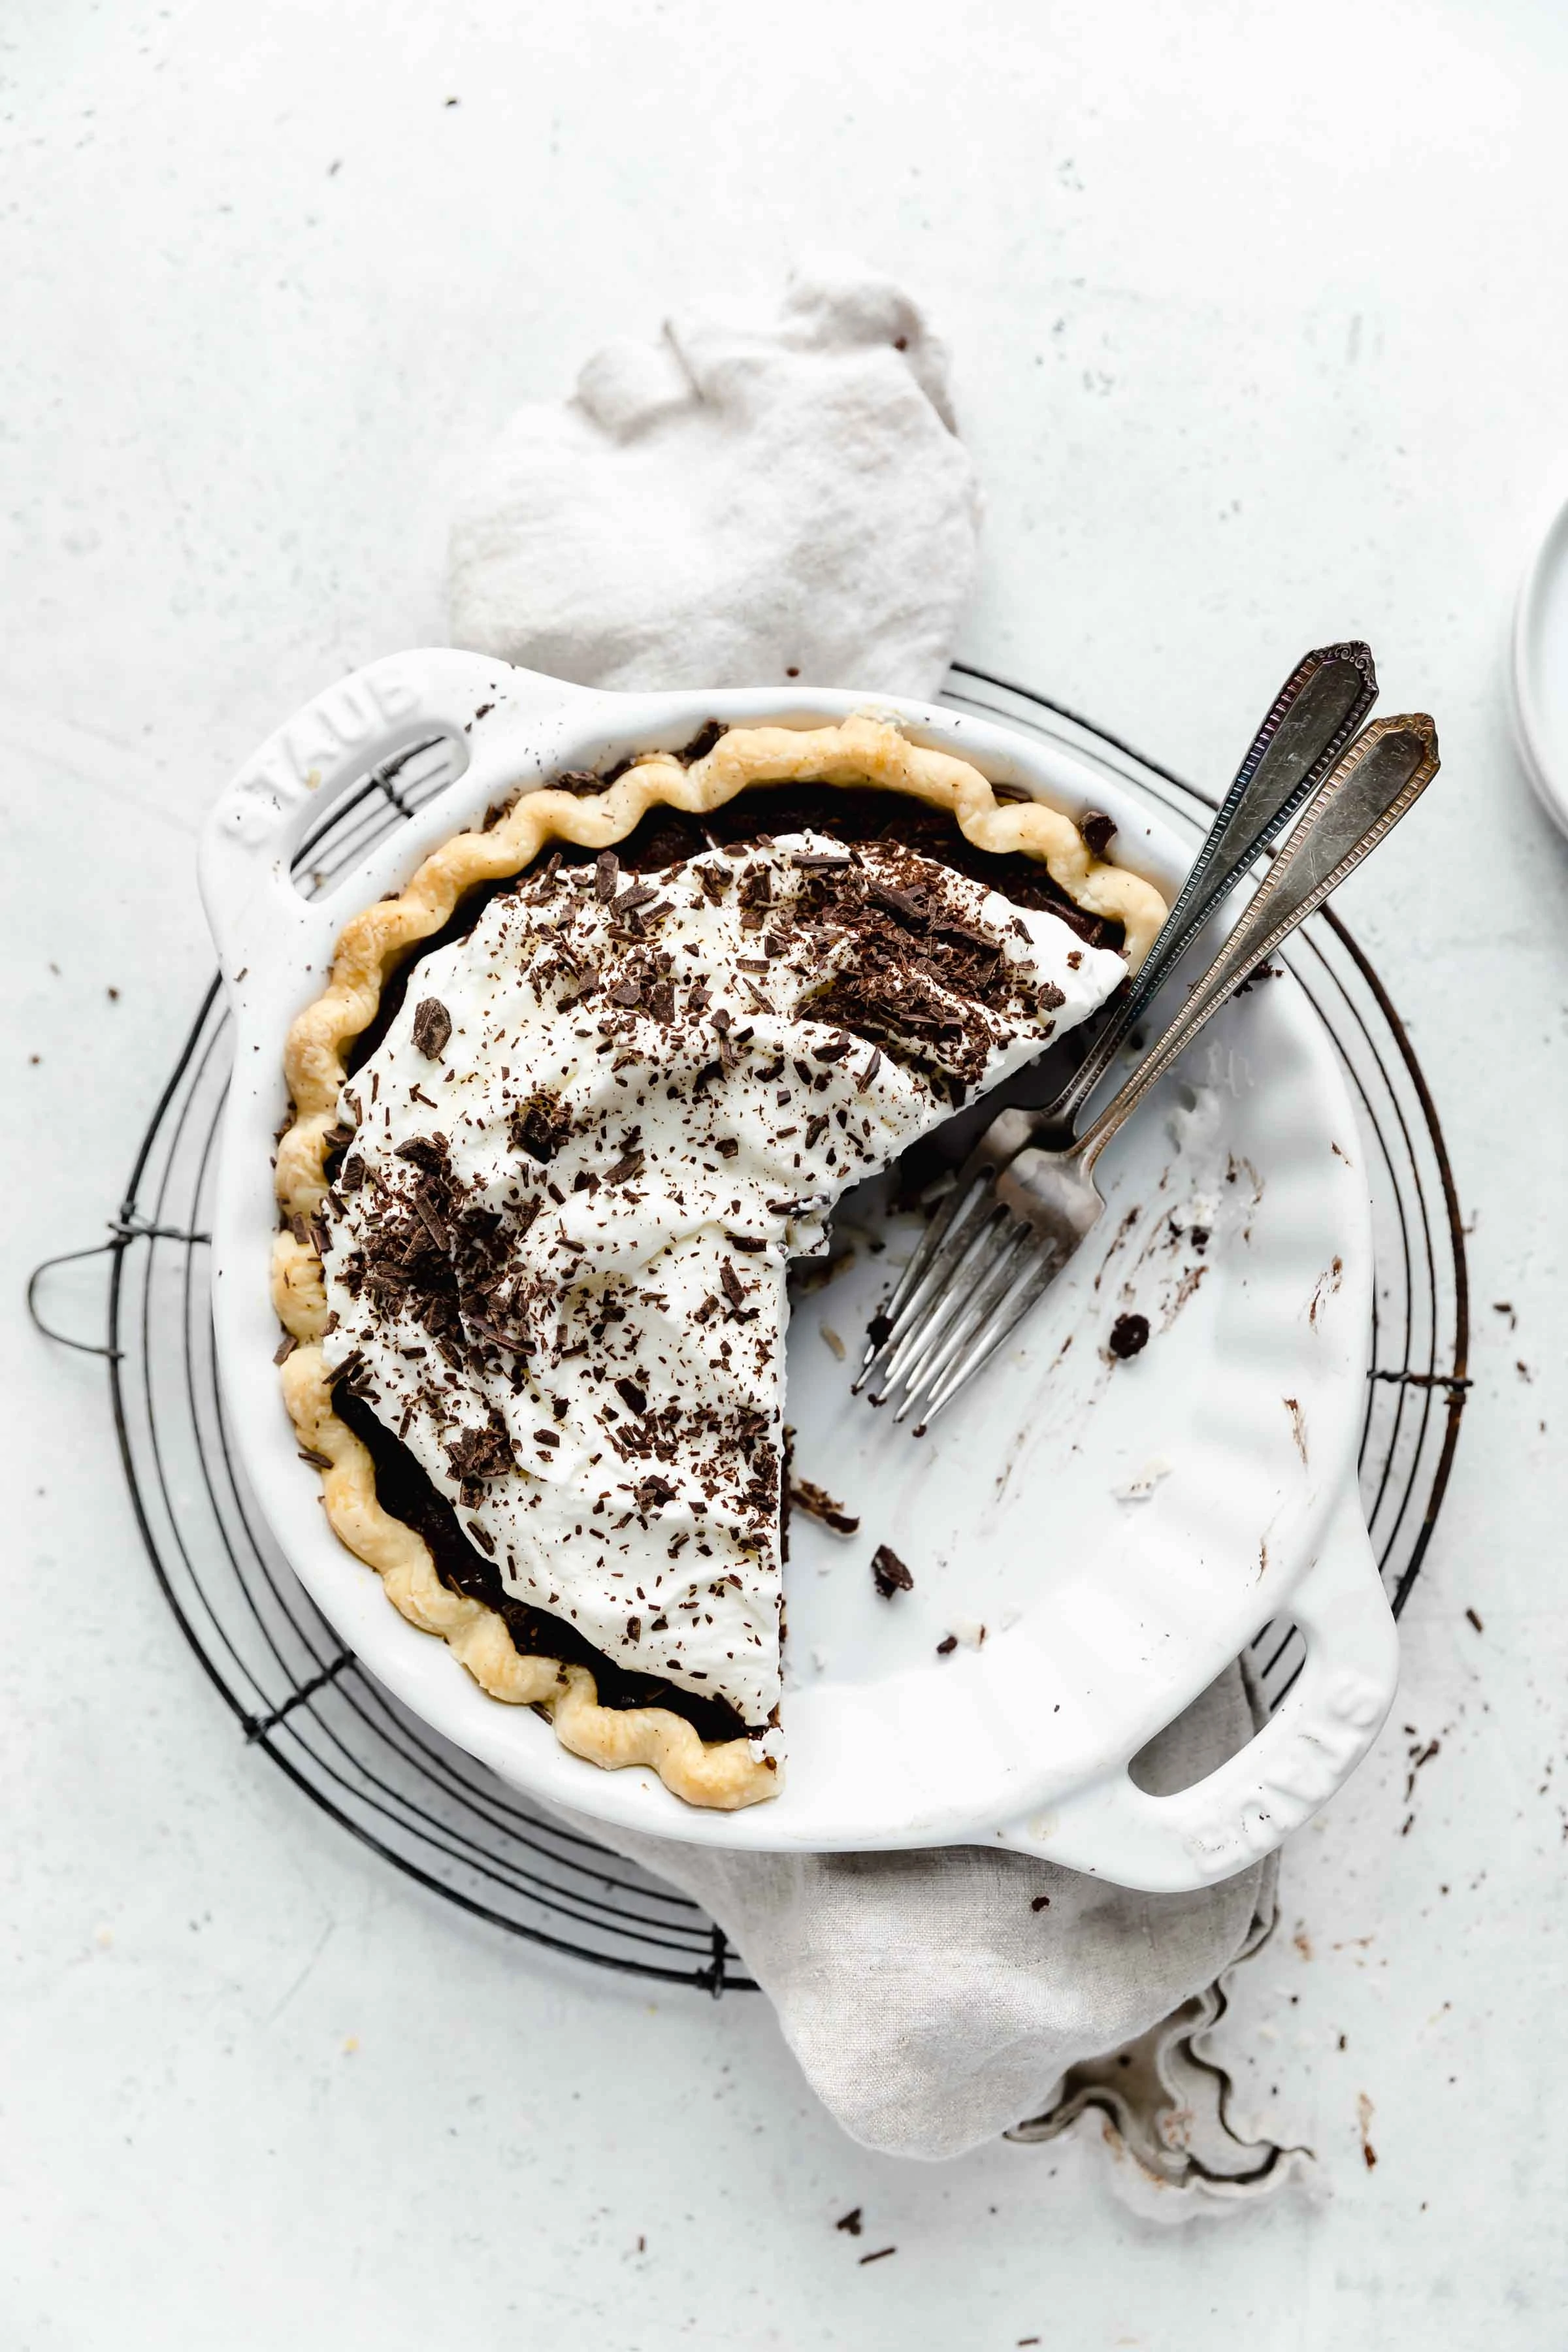 Rich, fudgy, and oh so chocolateyy this chocolate cream pie is a must for your thanksgiving dessert spread this year!